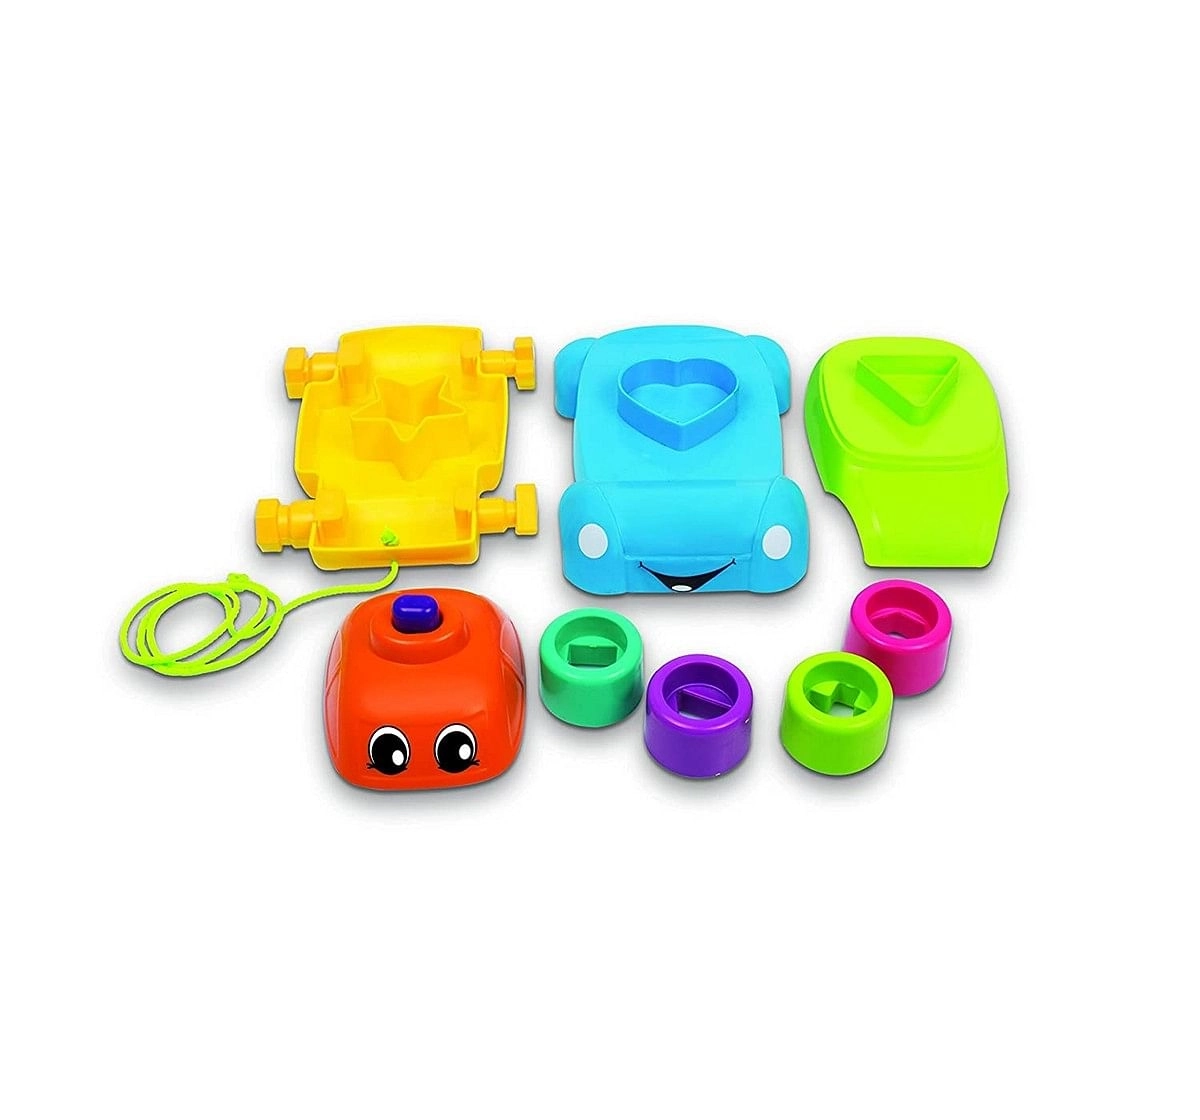 Giggles Stack A Car Activity Toys for Kids age 12M+ 